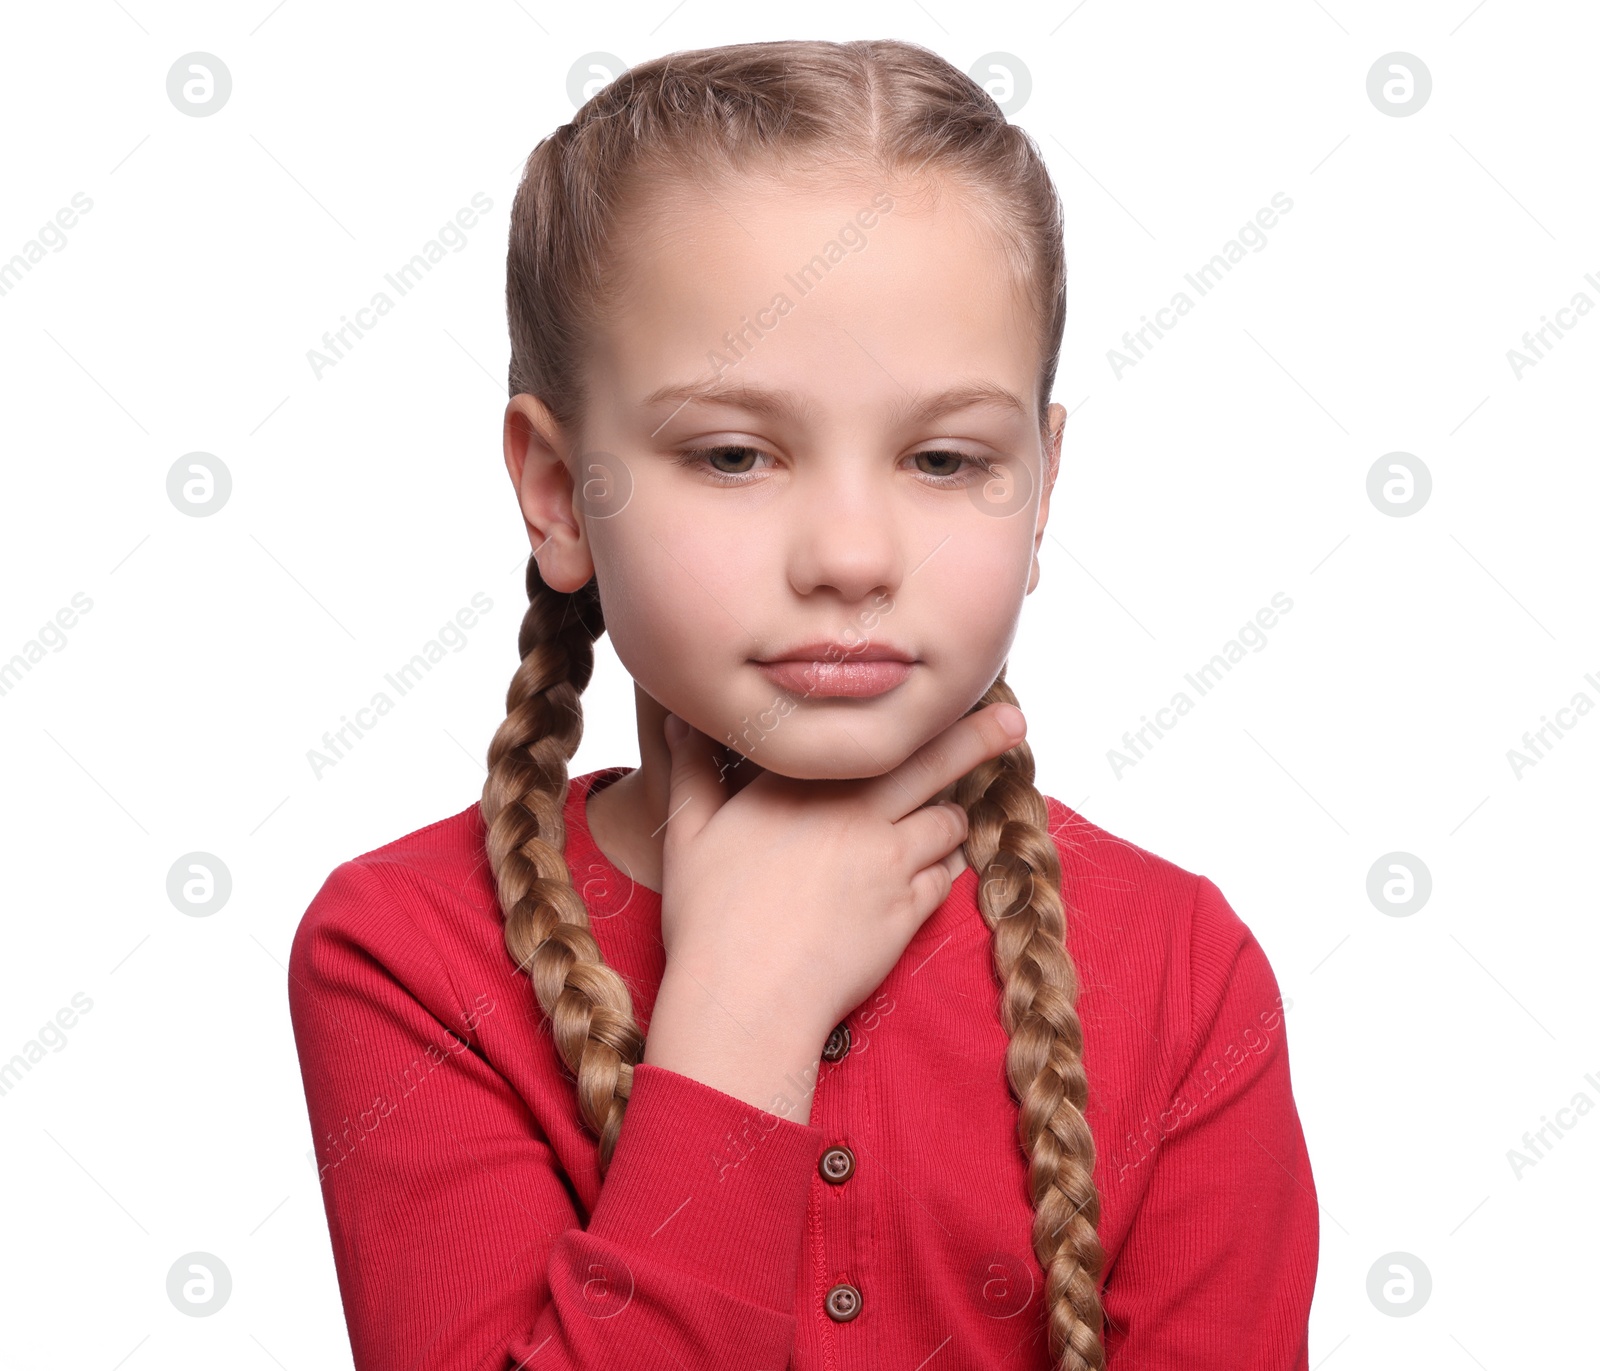 Photo of Girl suffering from sore throat on white background